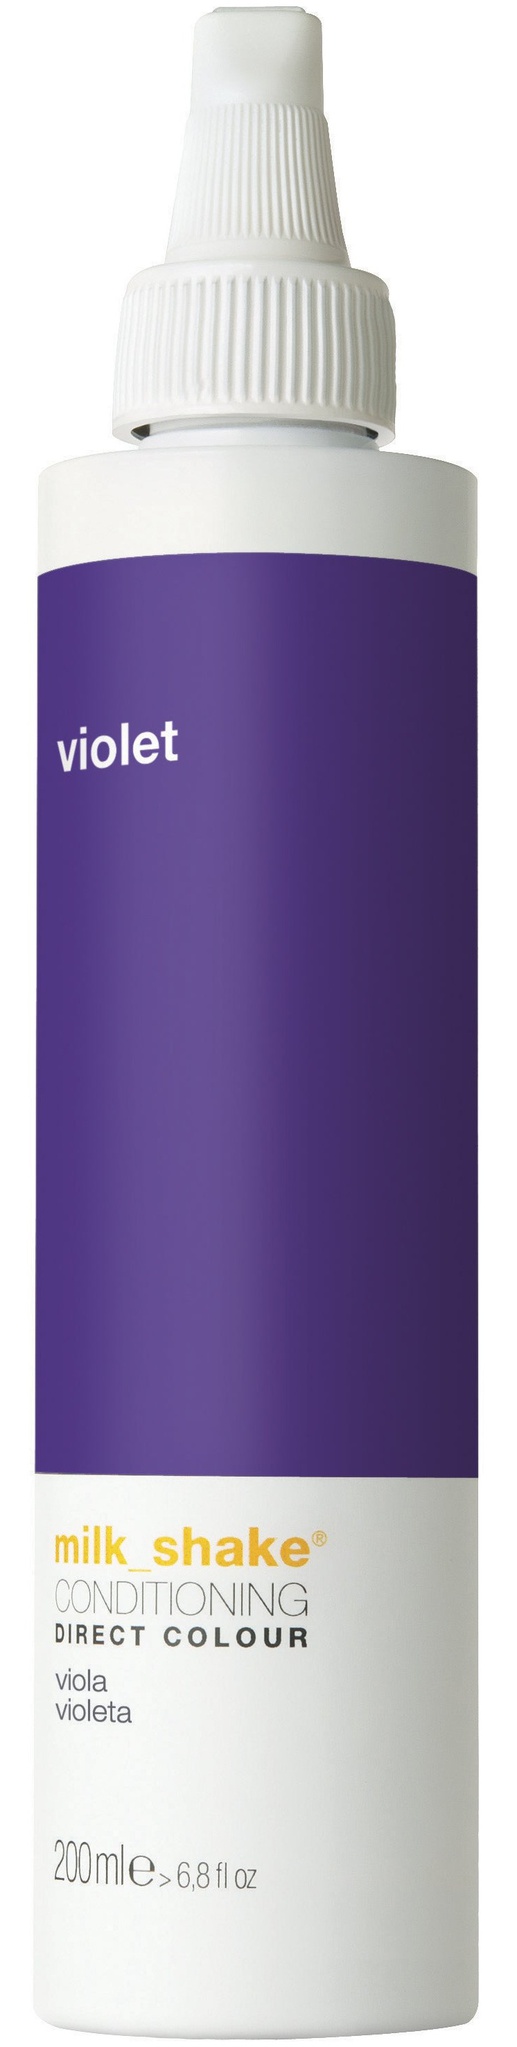 Milk shake Conditioning Direct Colour Violet